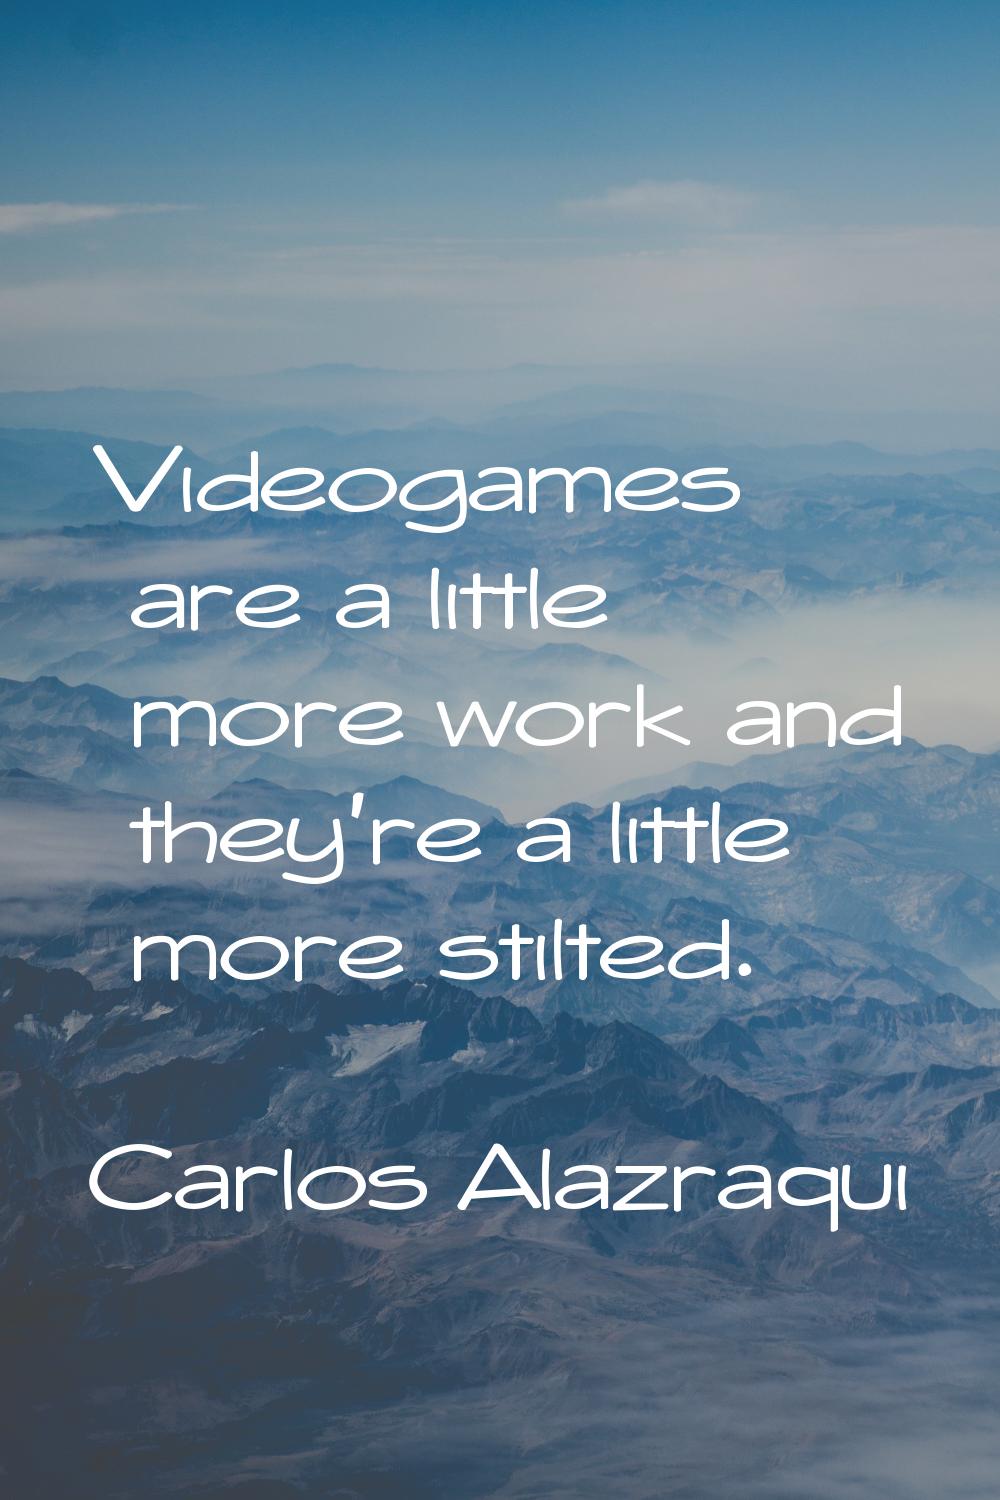 Videogames are a little more work and they're a little more stilted.